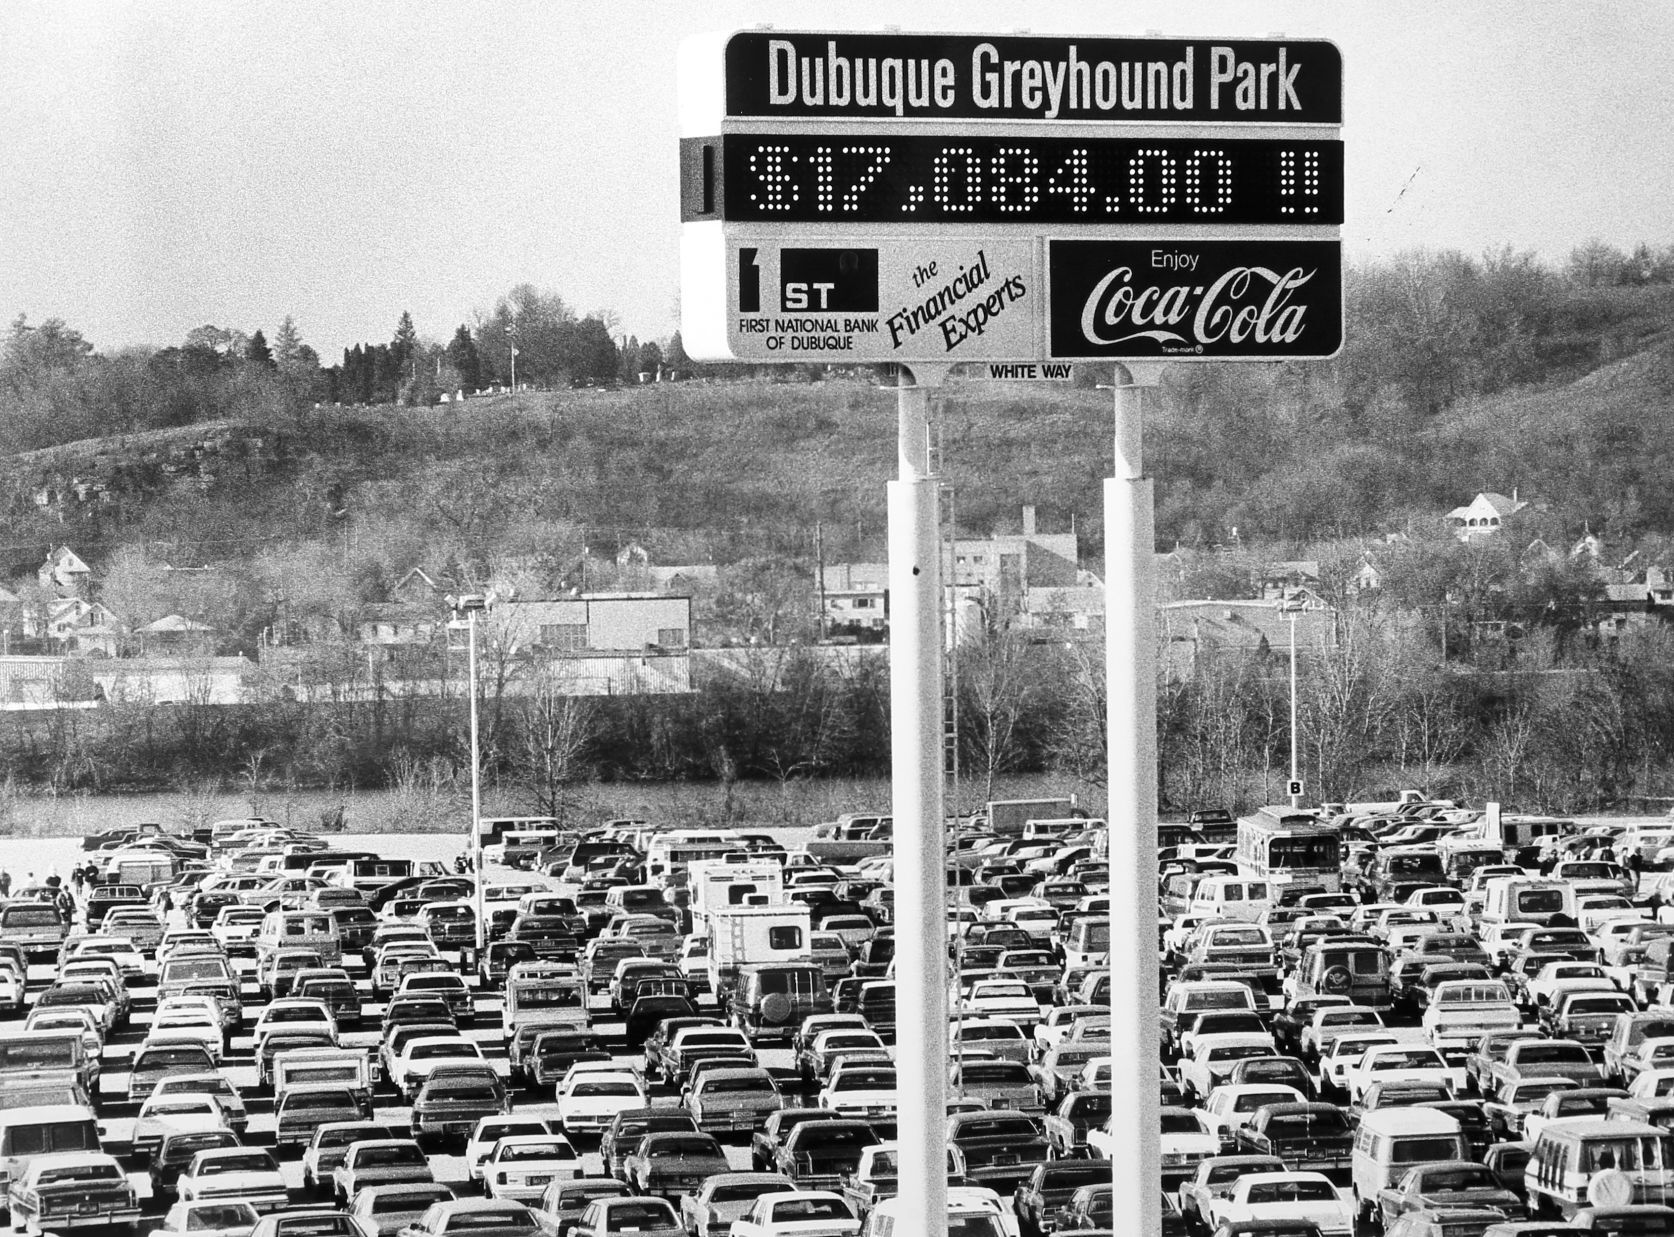 Cars fill the parking lot at Dubuque Greyhound Park in 1985.    PHOTO CREDIT: Telegraph Herald file